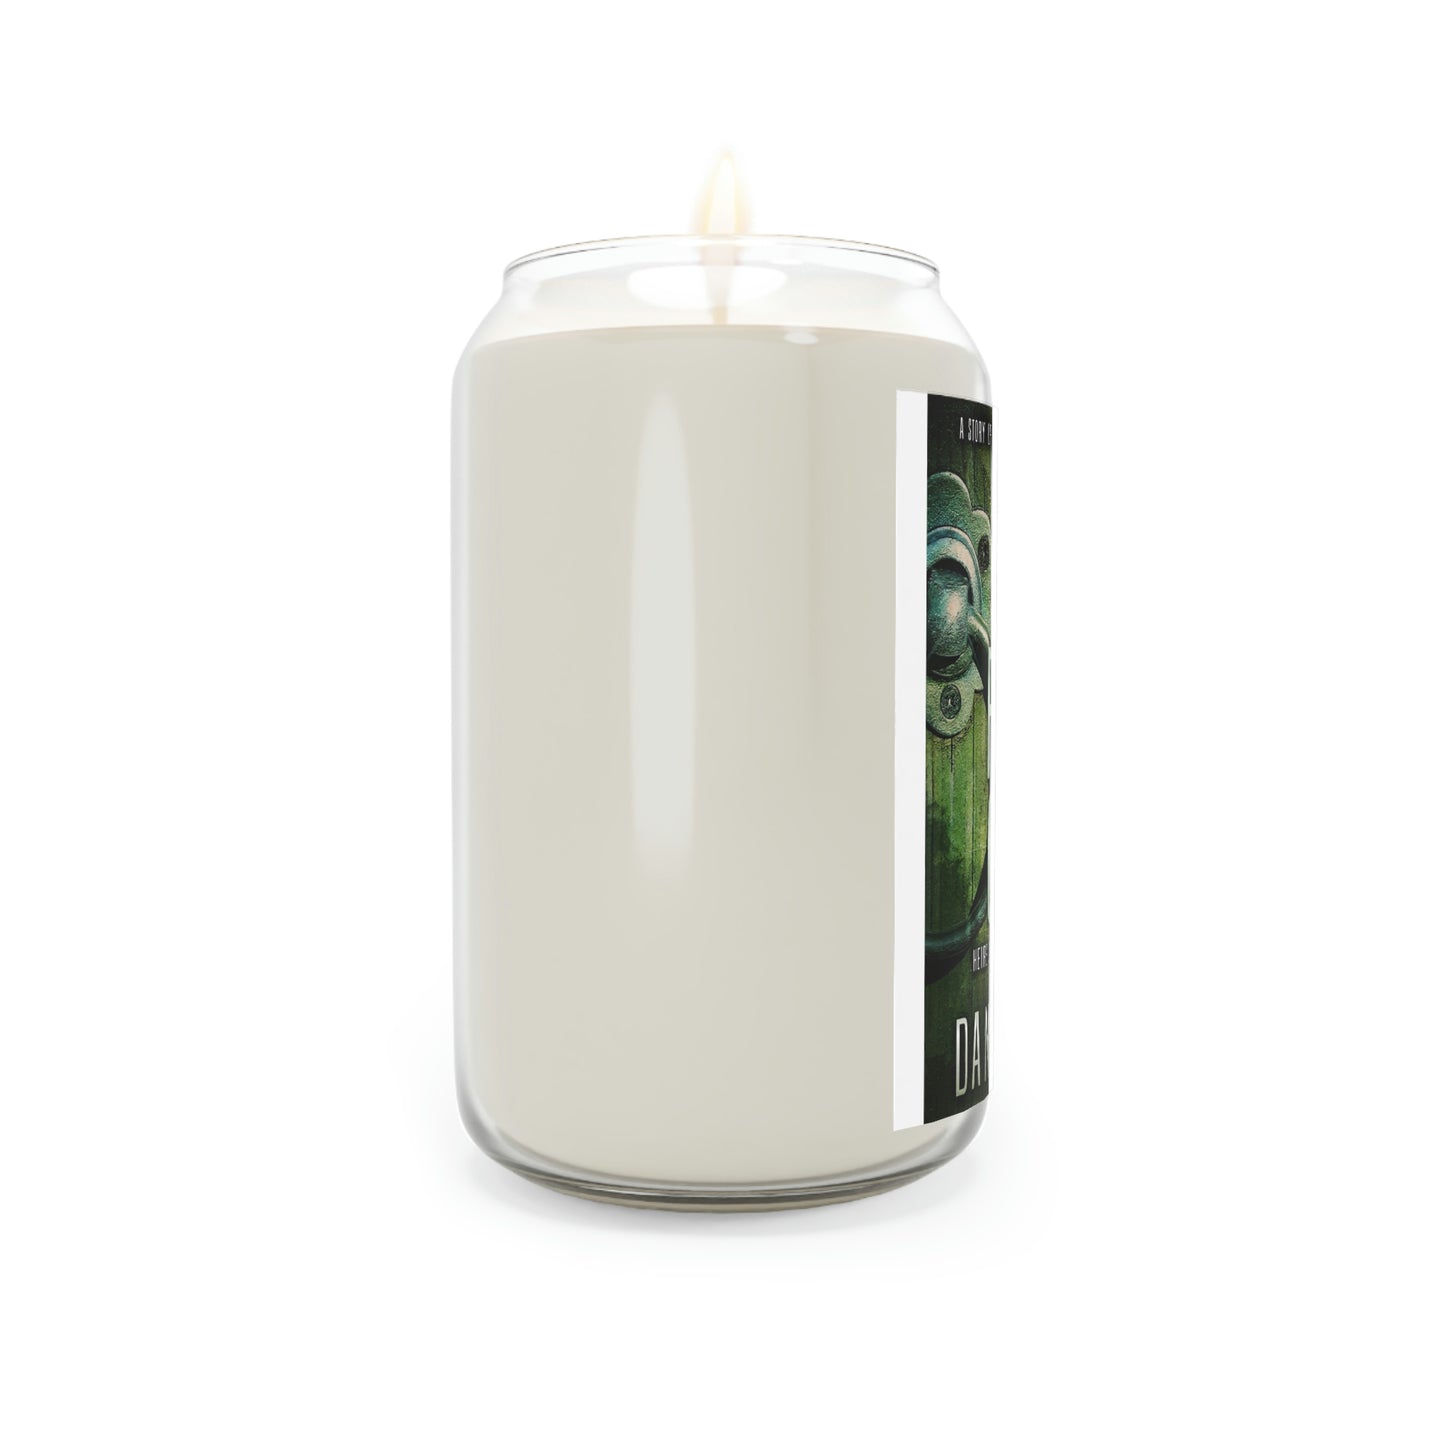 Percy Crow - Scented Candle